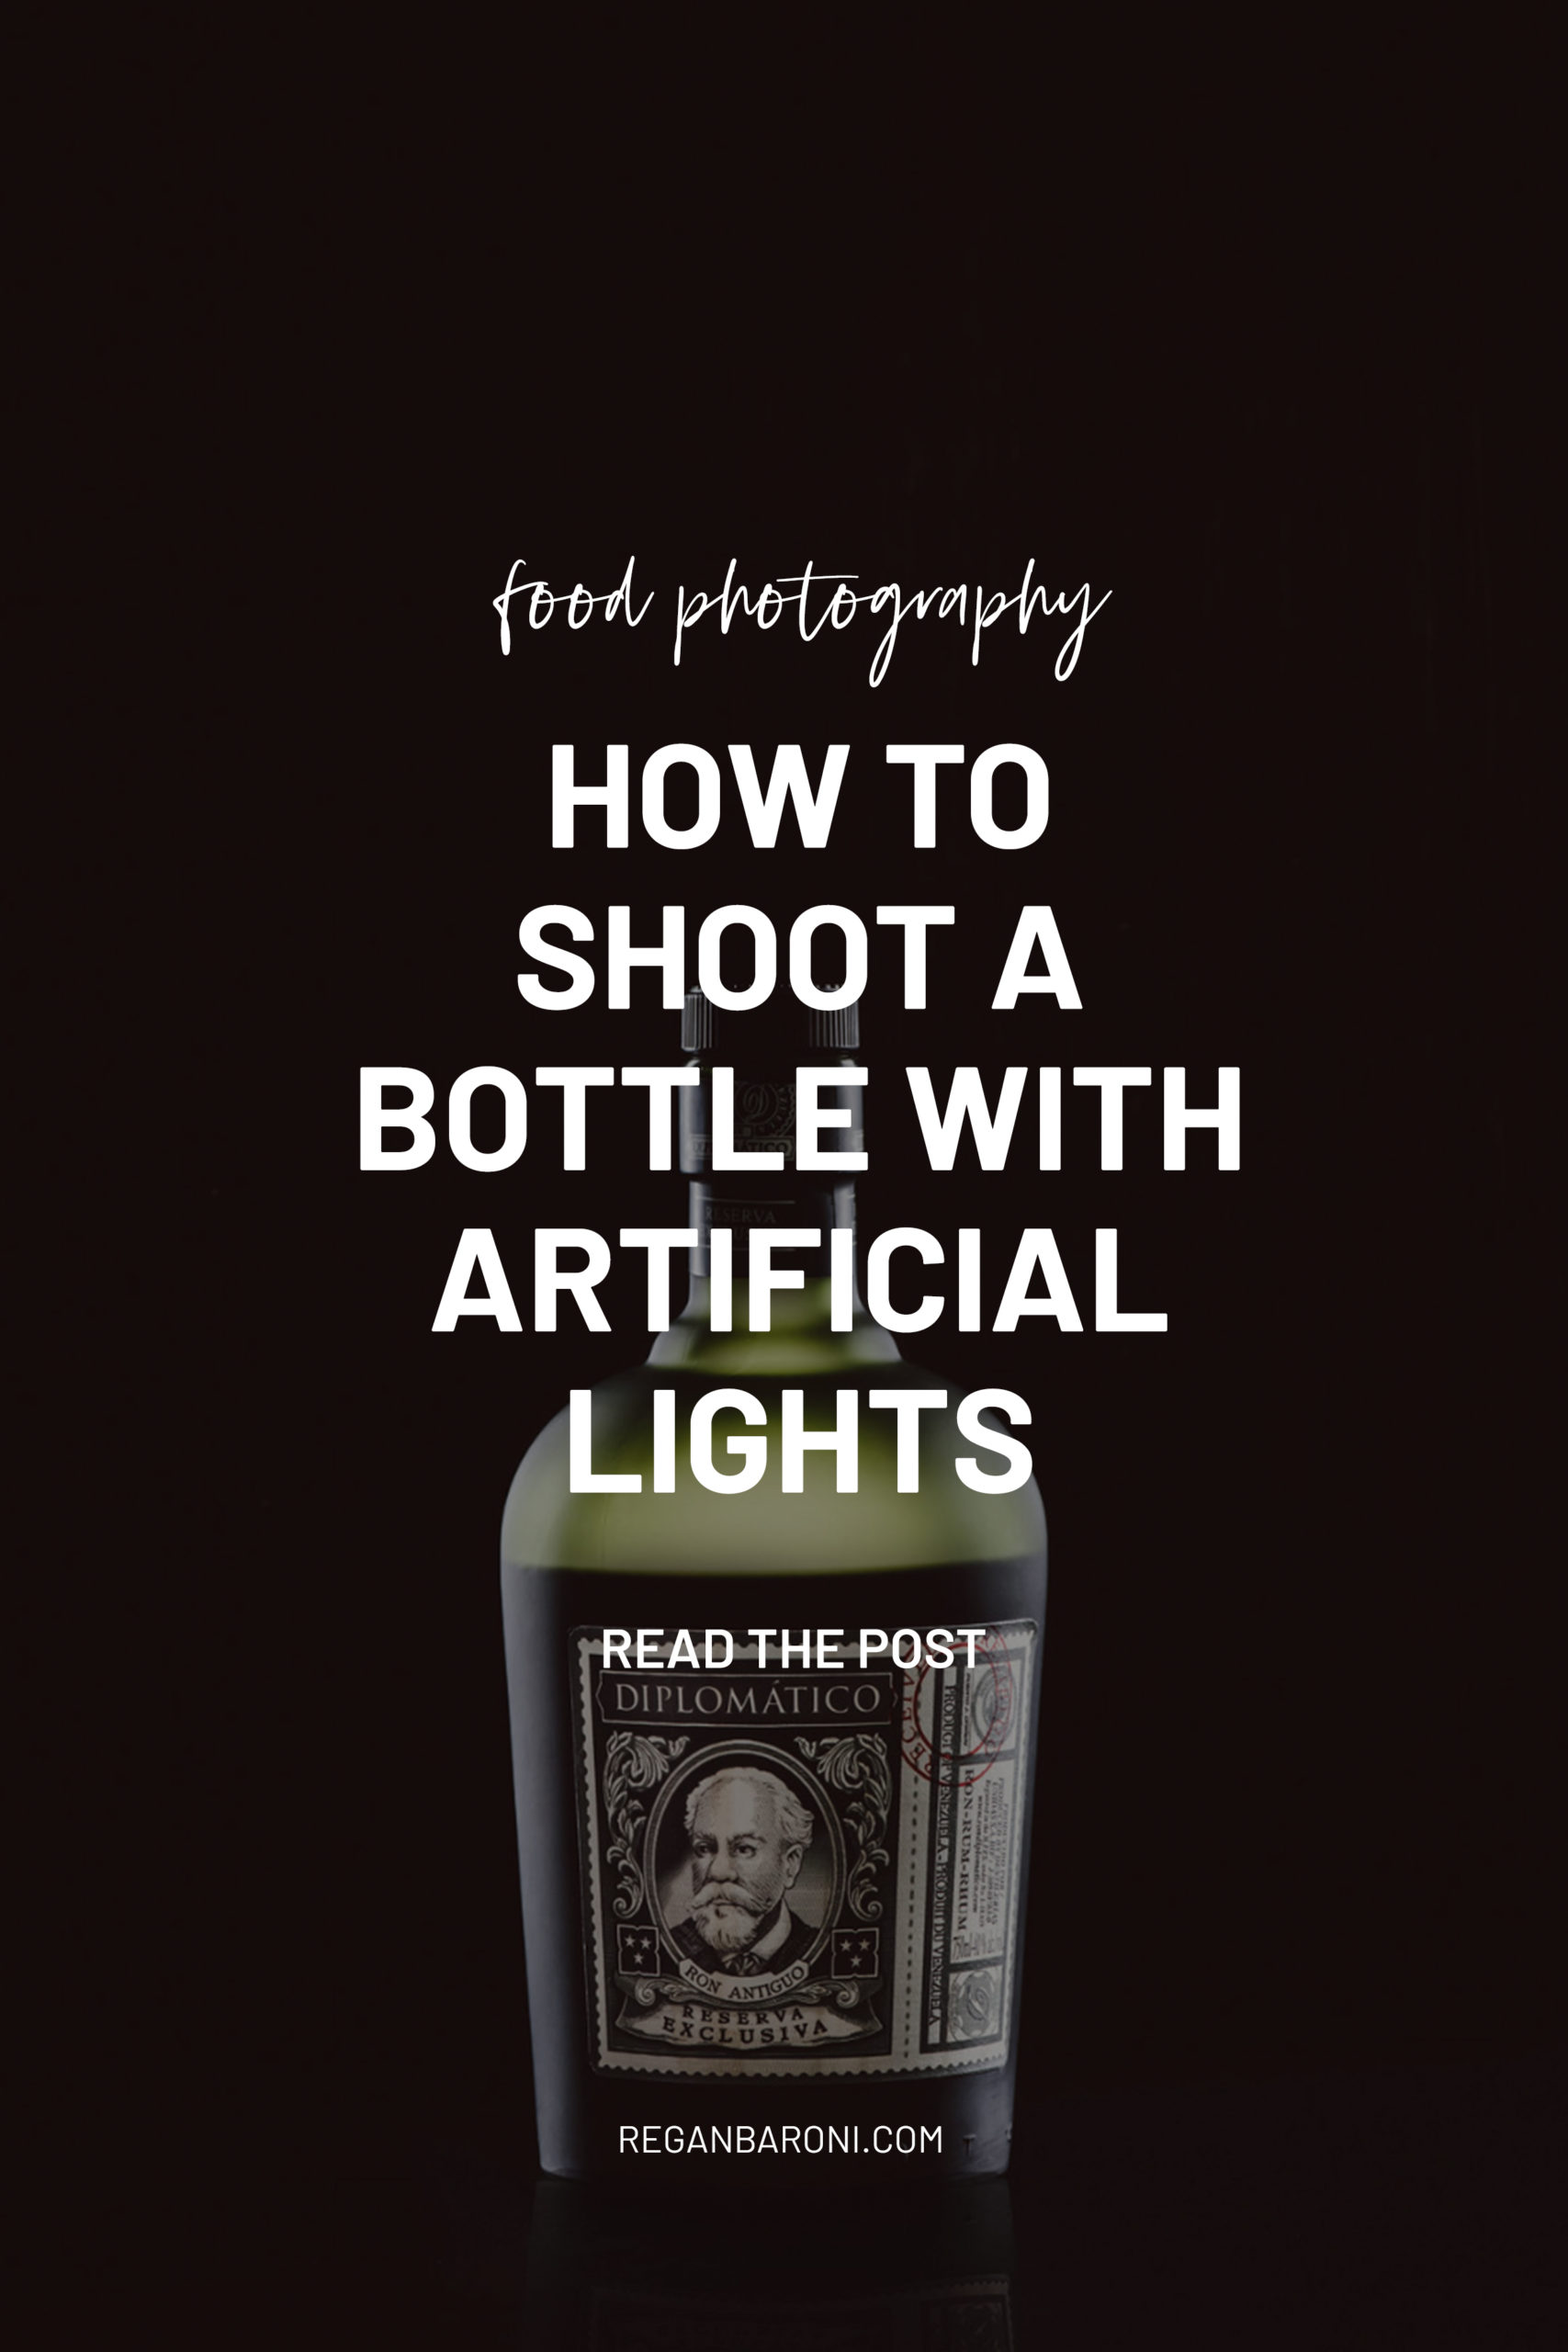 How To Shoot A Bottle With Artificial Lights